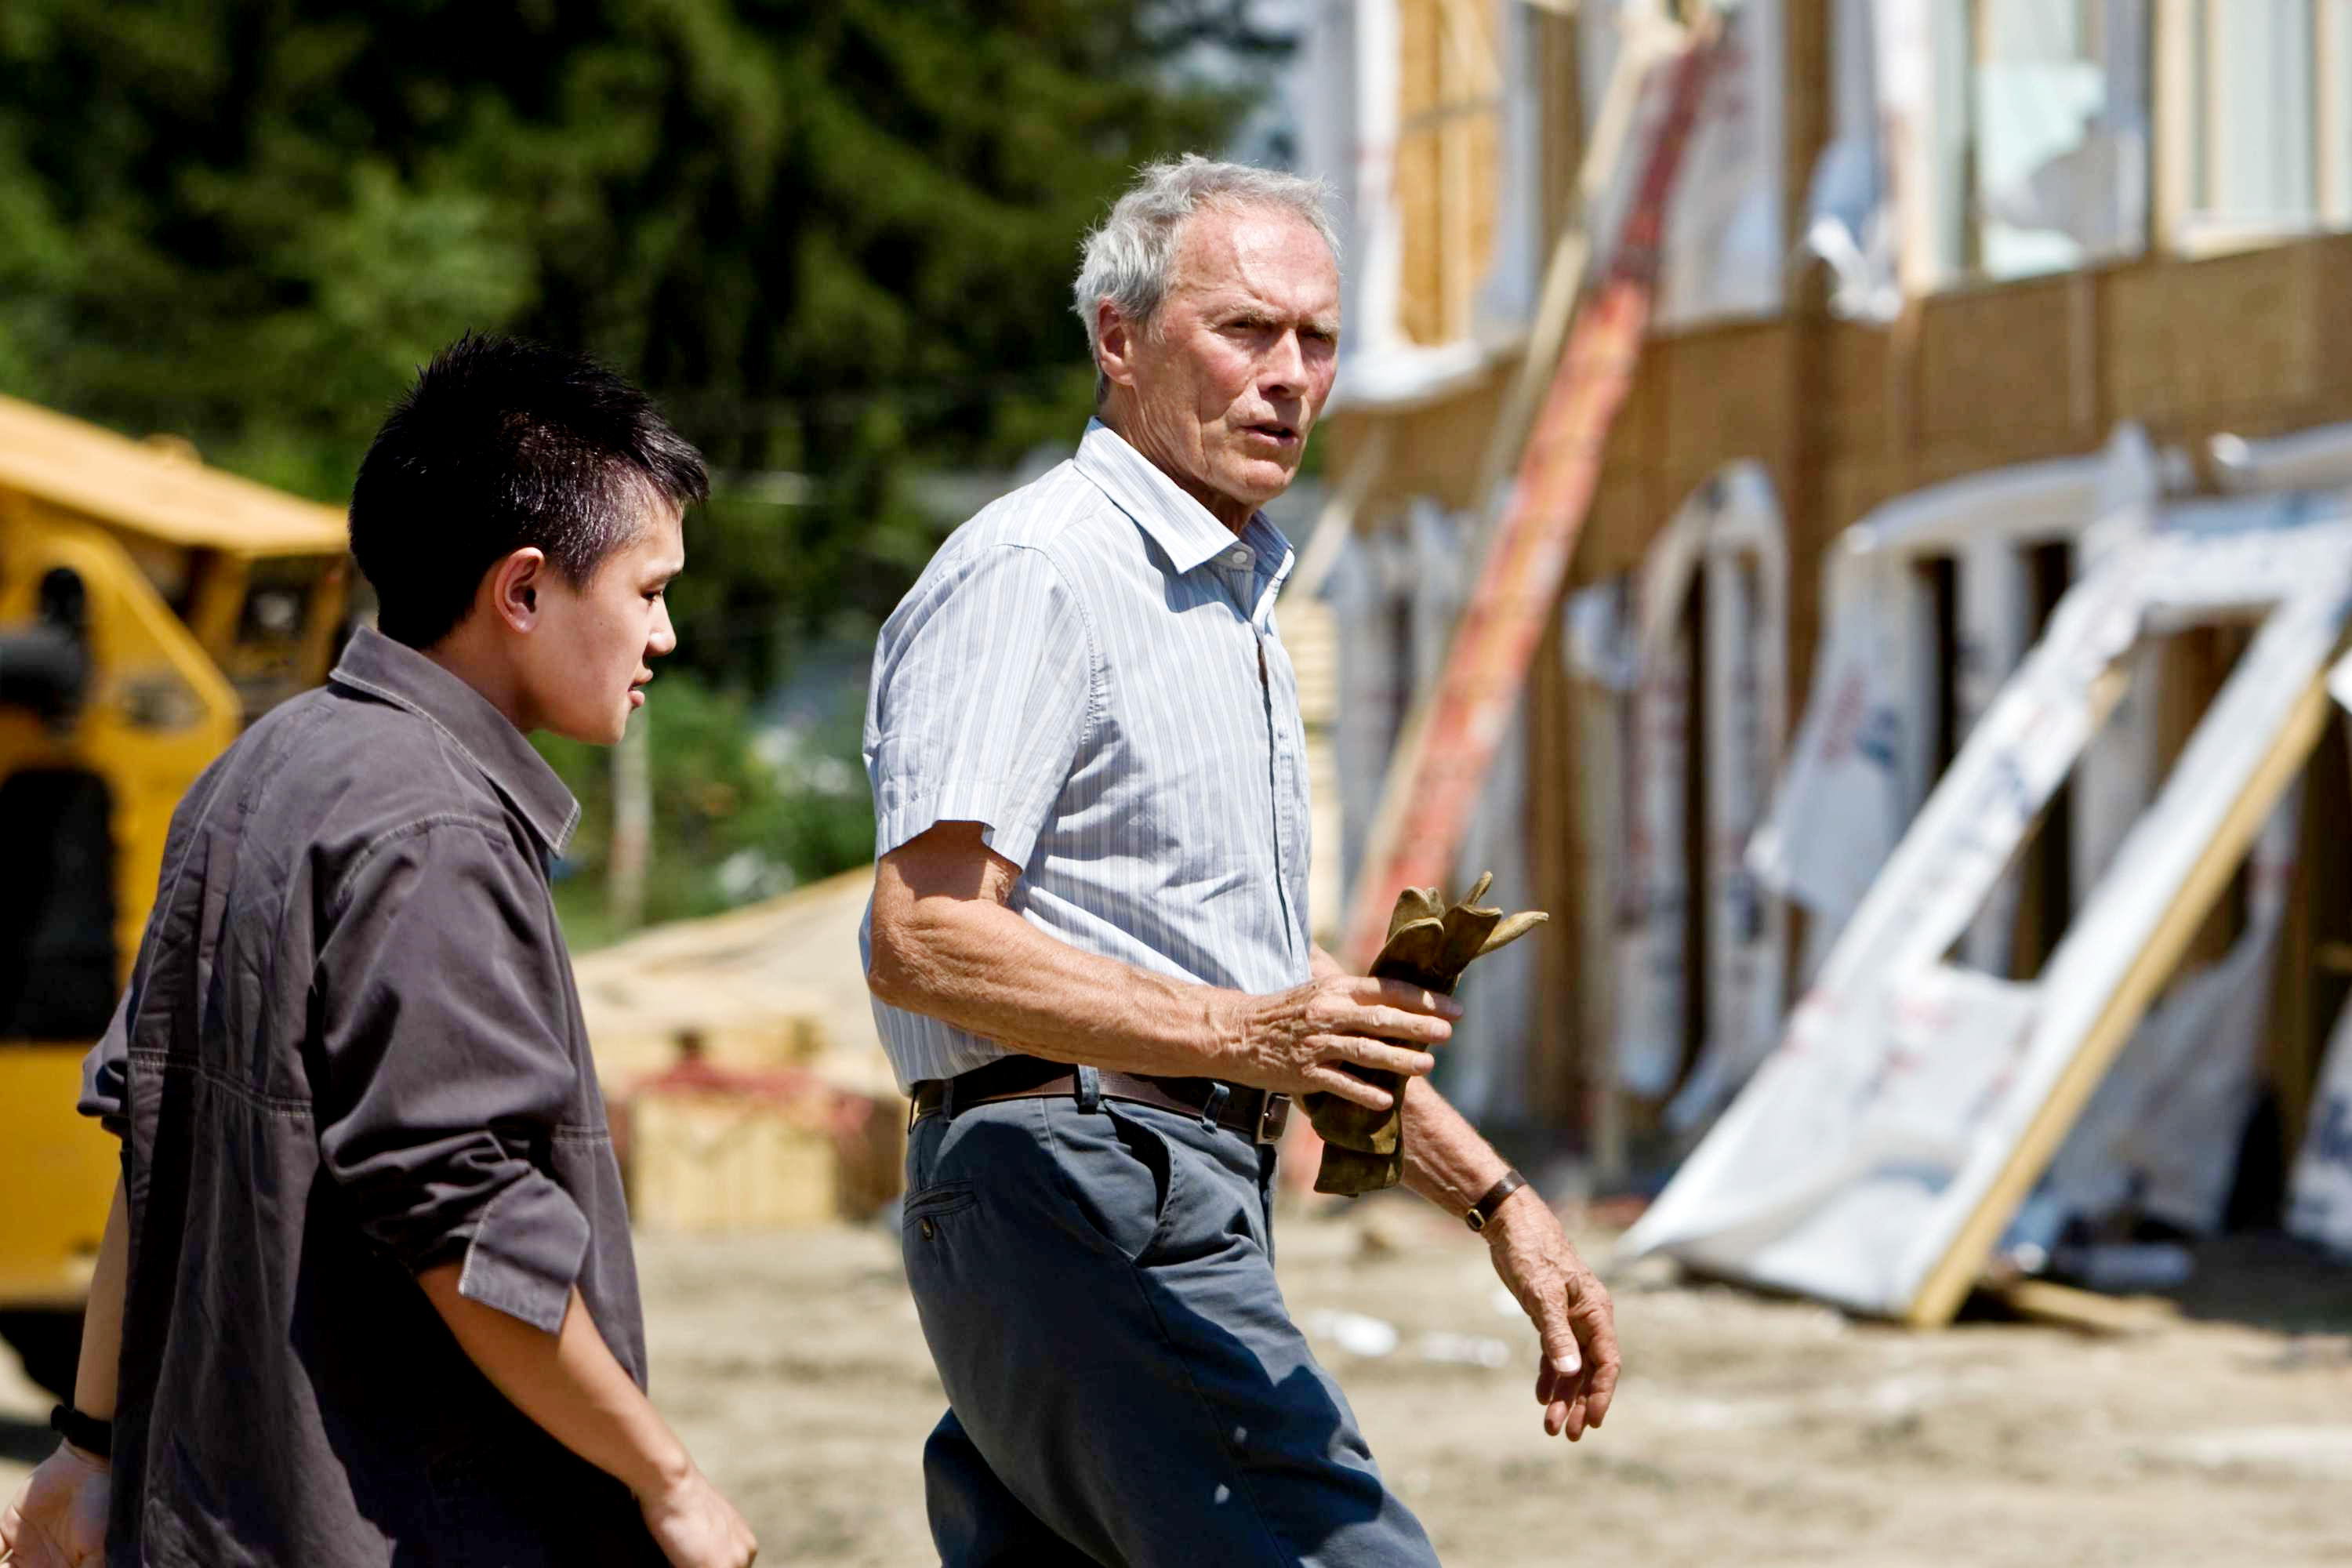 Bee Vang stars as Tao Vang Lor and Clint Eastwood stars as Walt Kowalski in Warner Bros. Pictures' Gran Torino (2008). Photo credit by Anthony Michael Rivetti.